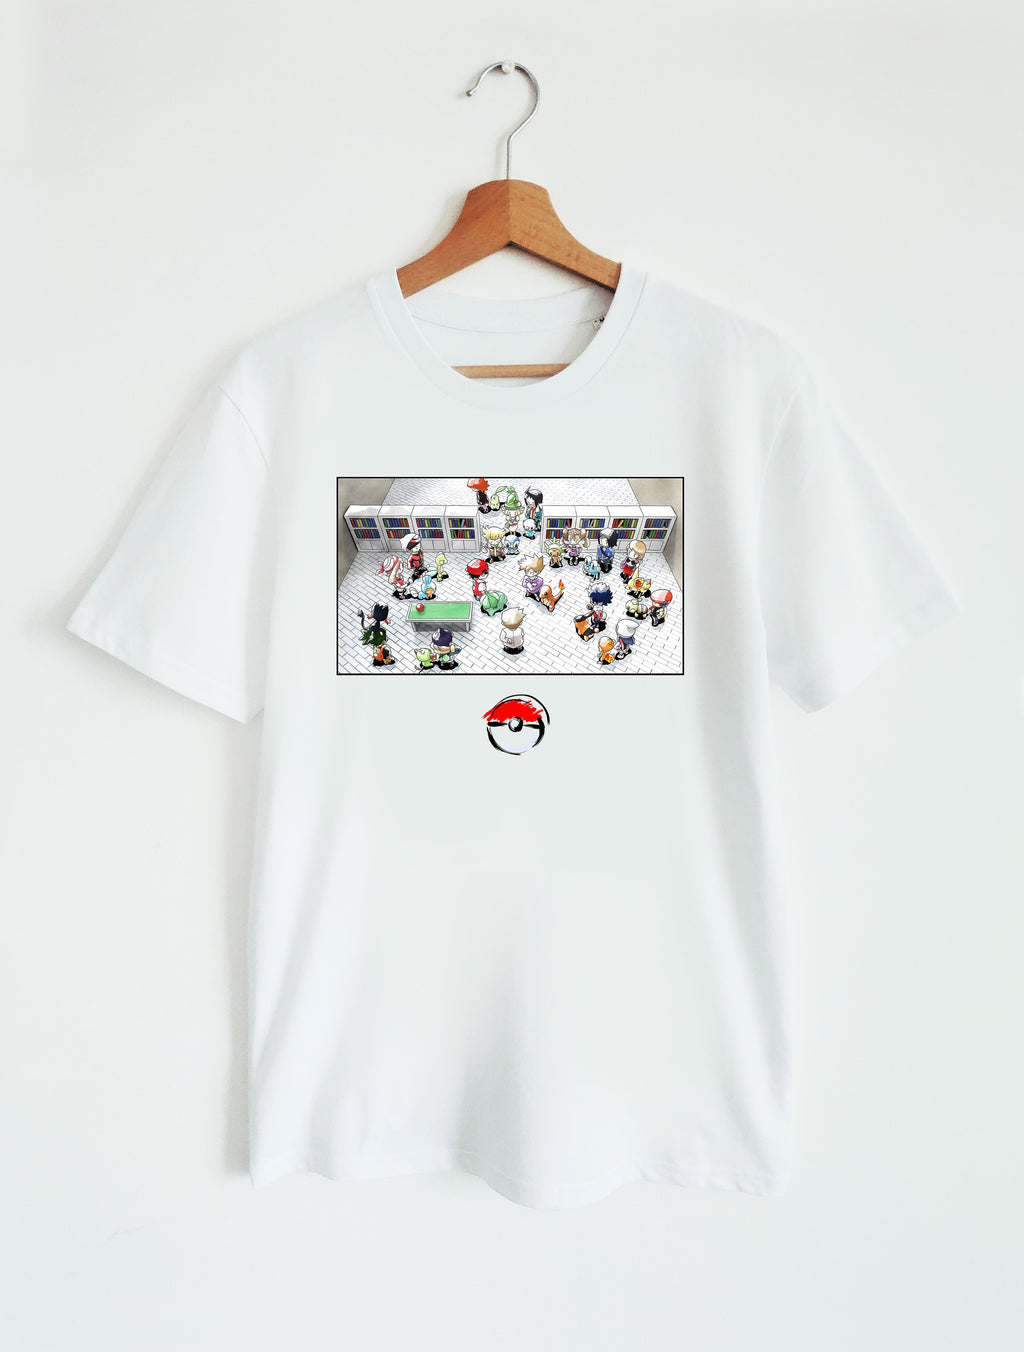 T-SHIRT WHITE UNISEX COLORS | PKM - TRAINERS & STARTERS